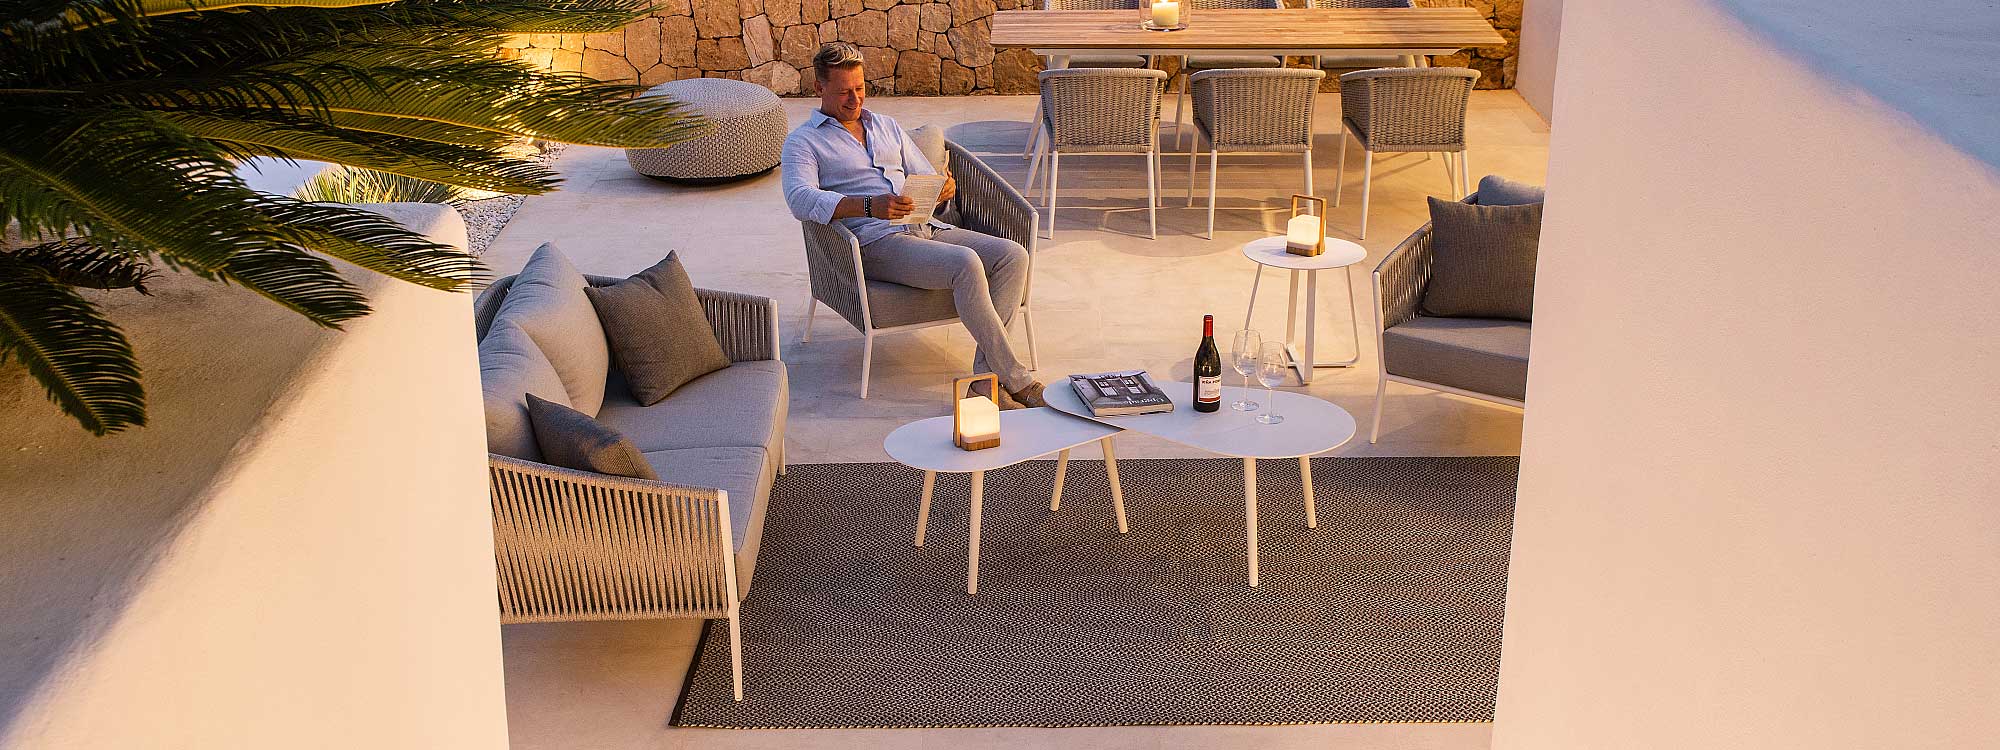 Image of man sat on Fortuna Rope white garden lounge chair with grey-melange woven back, shown on illuminated white-washed terrace at night